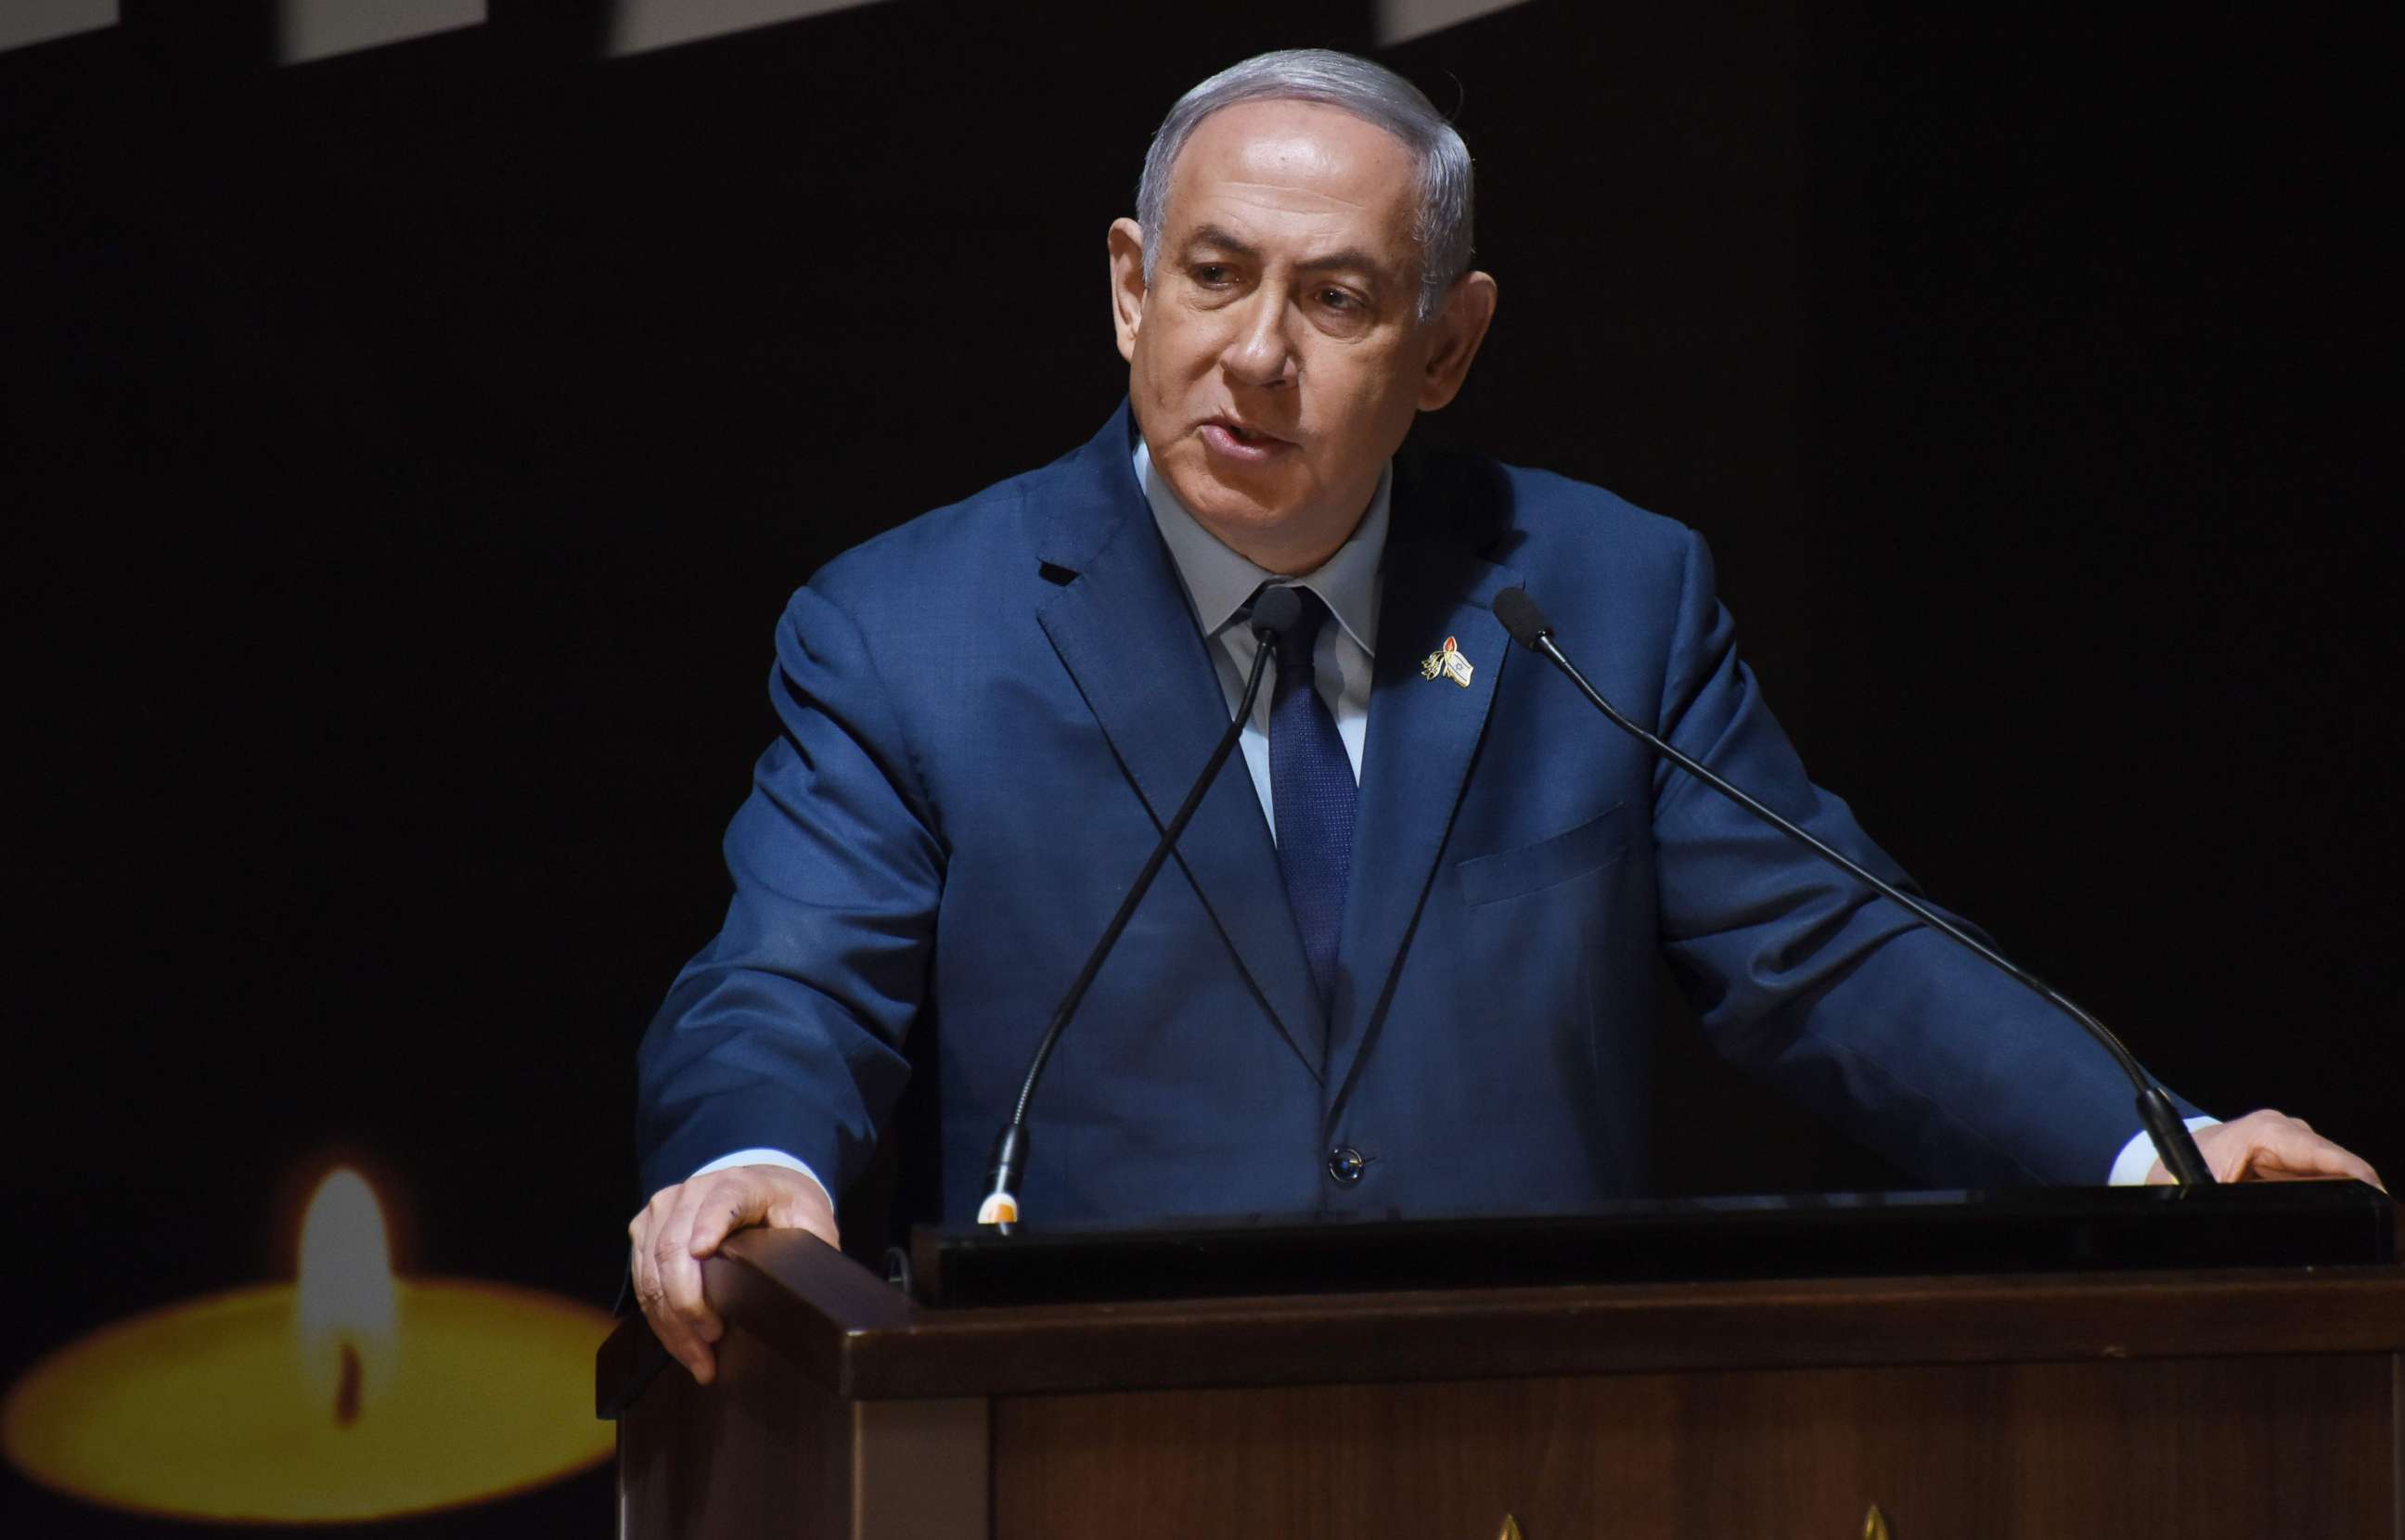 PHOTO: Israeli Prime Minister Benjamin Netanyahu speaks at the official ceremony for Israel's Remembrance Day for fallen soldiers in the Mt. Herzl Military Cemetery in Jerusalem, April 18, 2018.  